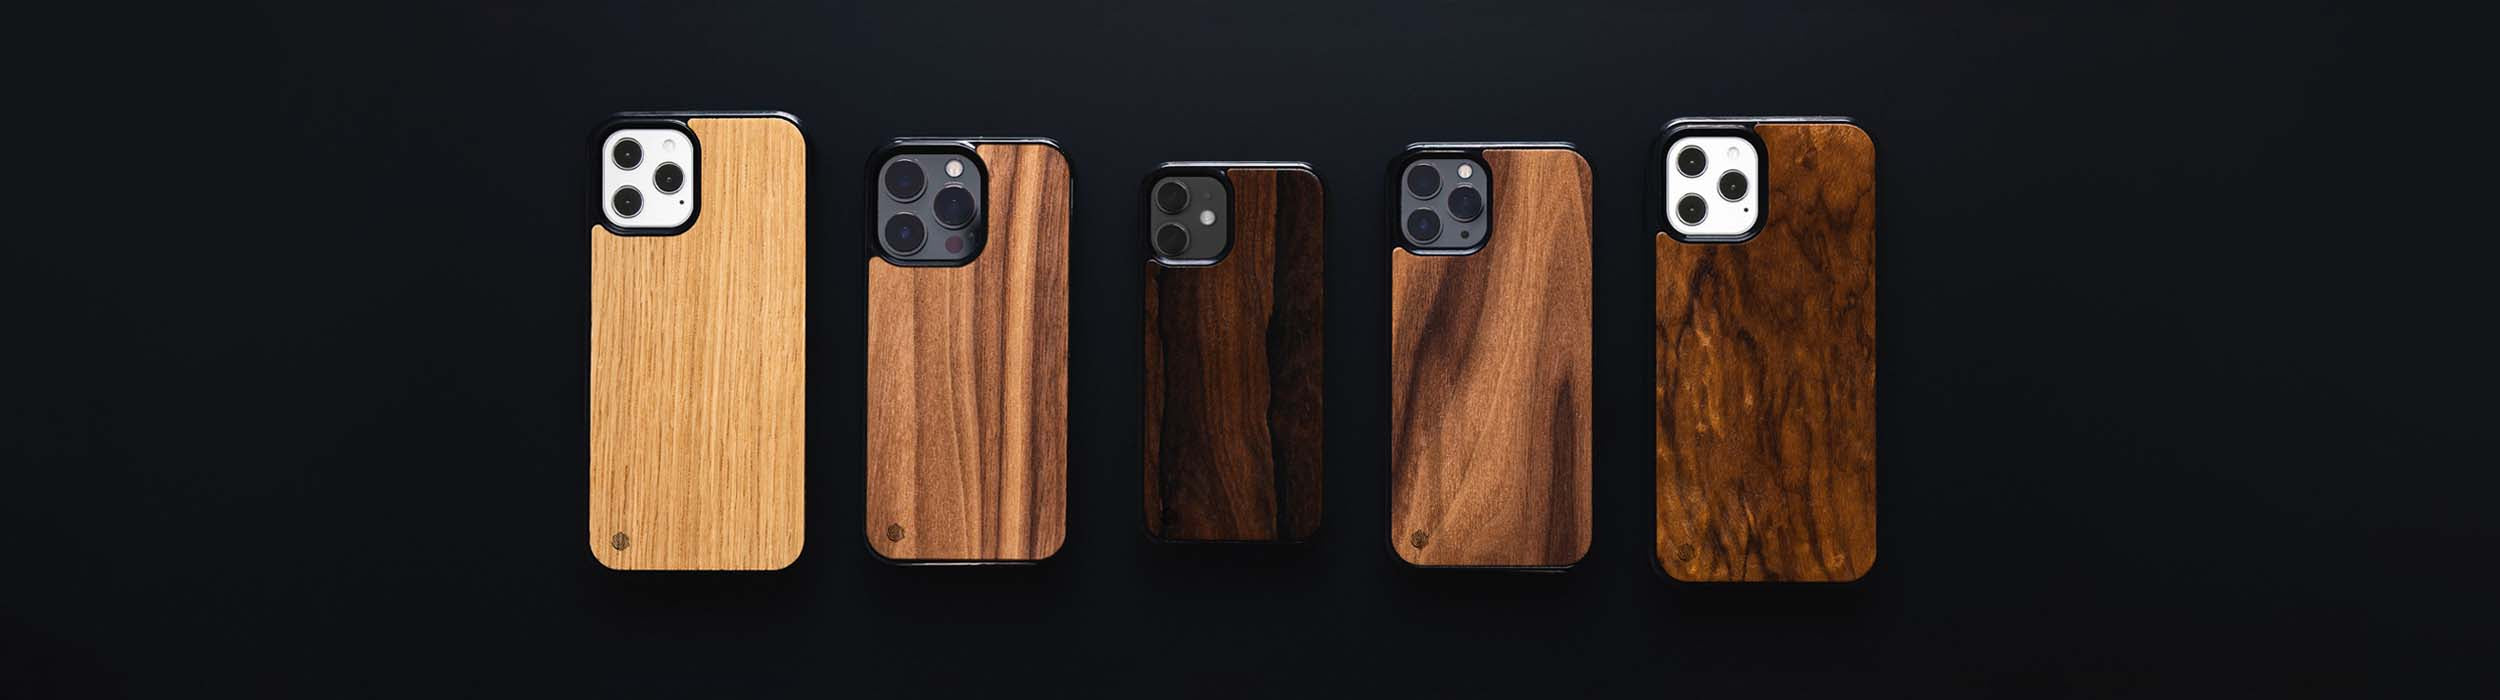 Apple iPhone 12 PRO Wooden Phone Cases